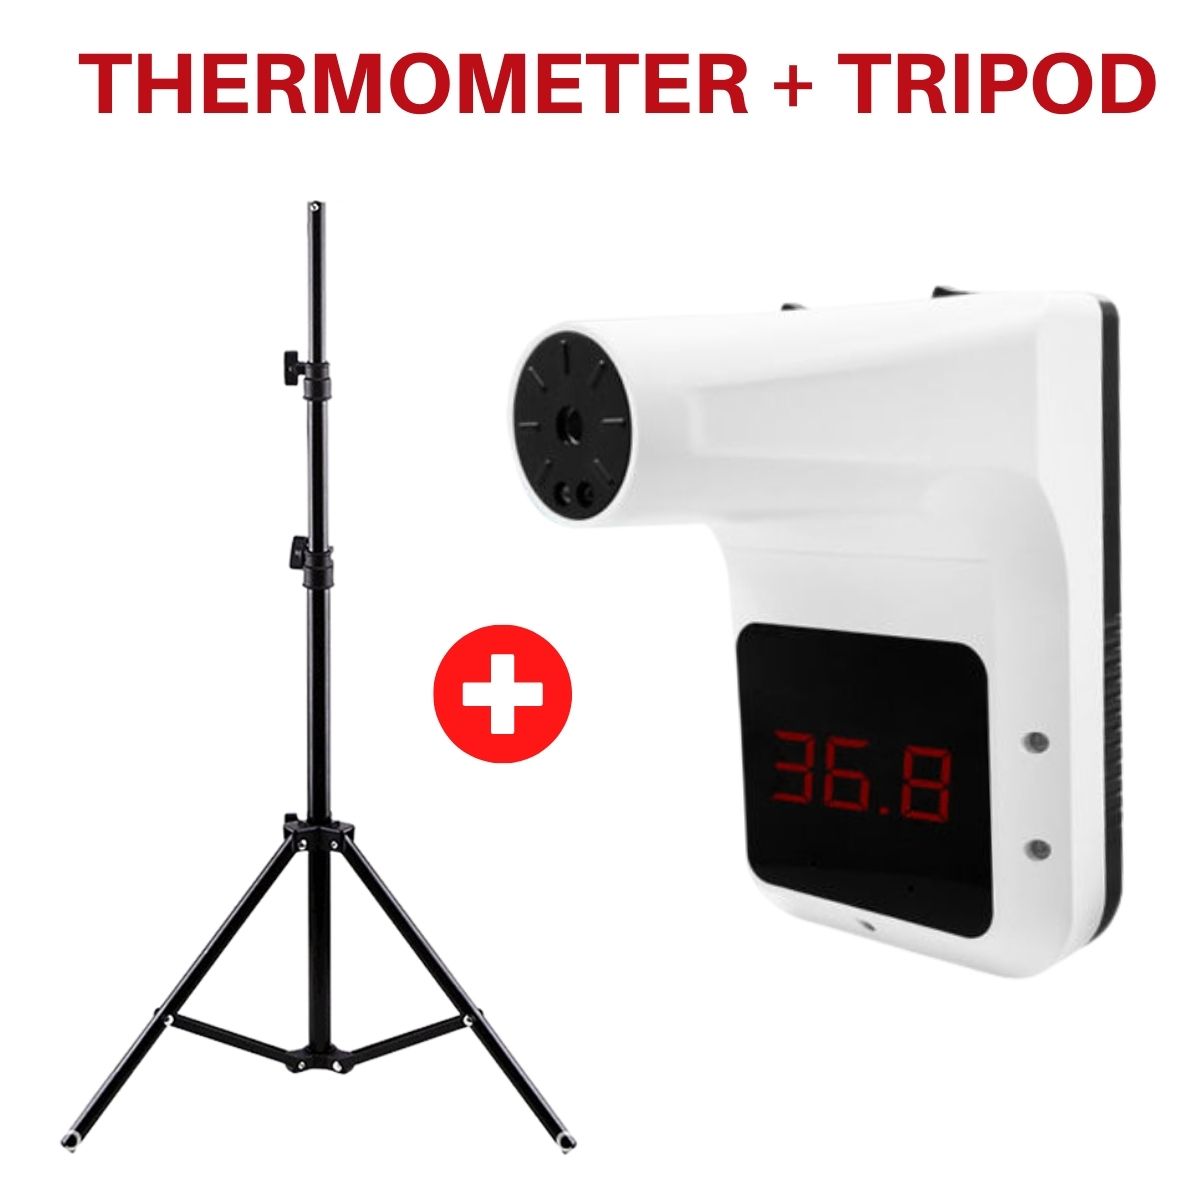 Q3 / K3X / K3 PRO Thermometer Non Contact Digital Infrared Forehead Measurement Temperature With Tripod Stand 测溫儀